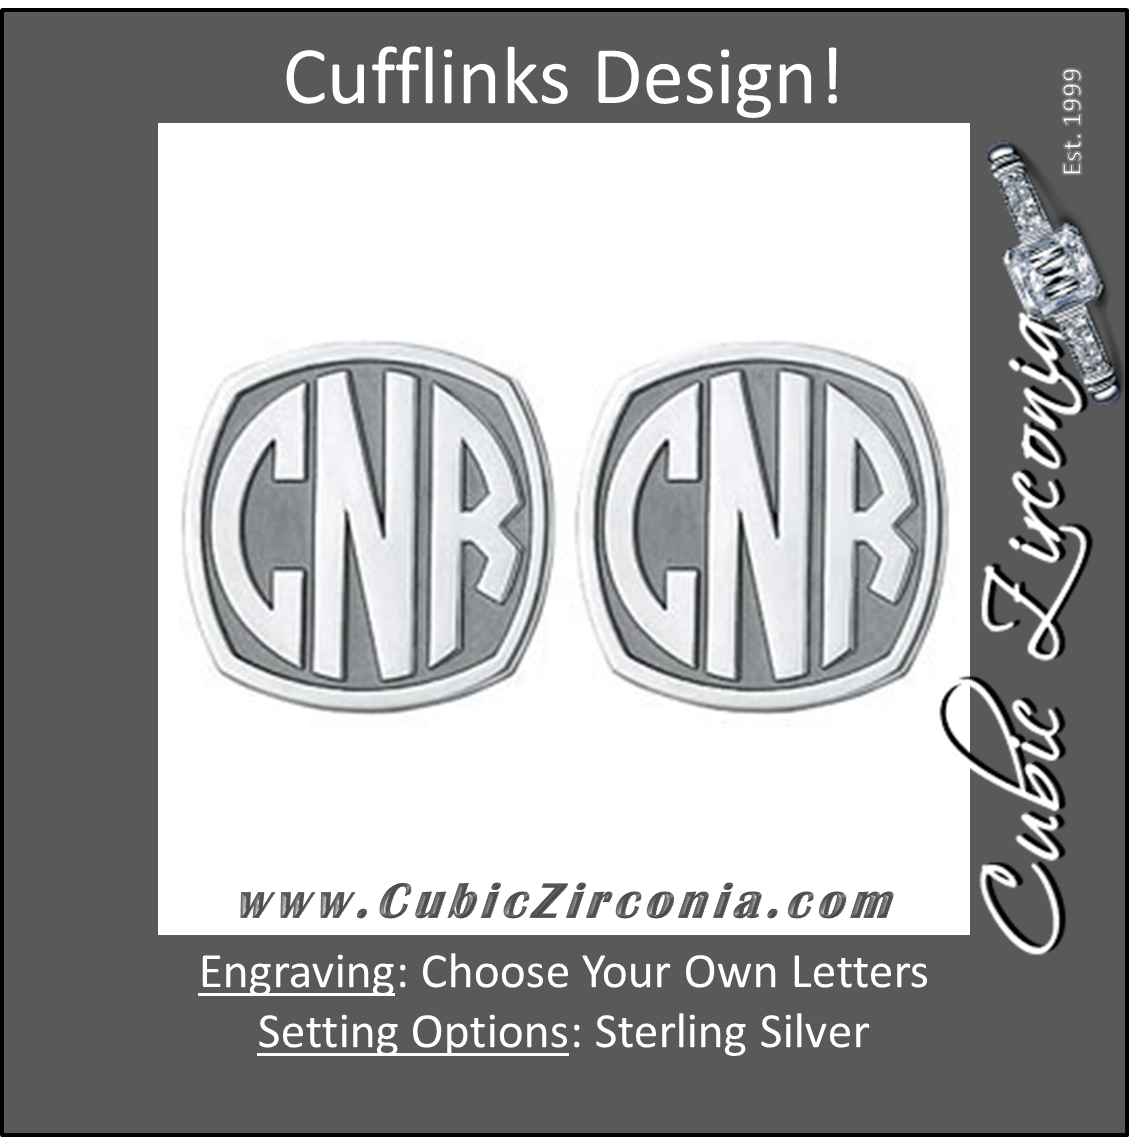 Men's Cufflinks- Customizable Monogram, Badge Style with Impact Letters